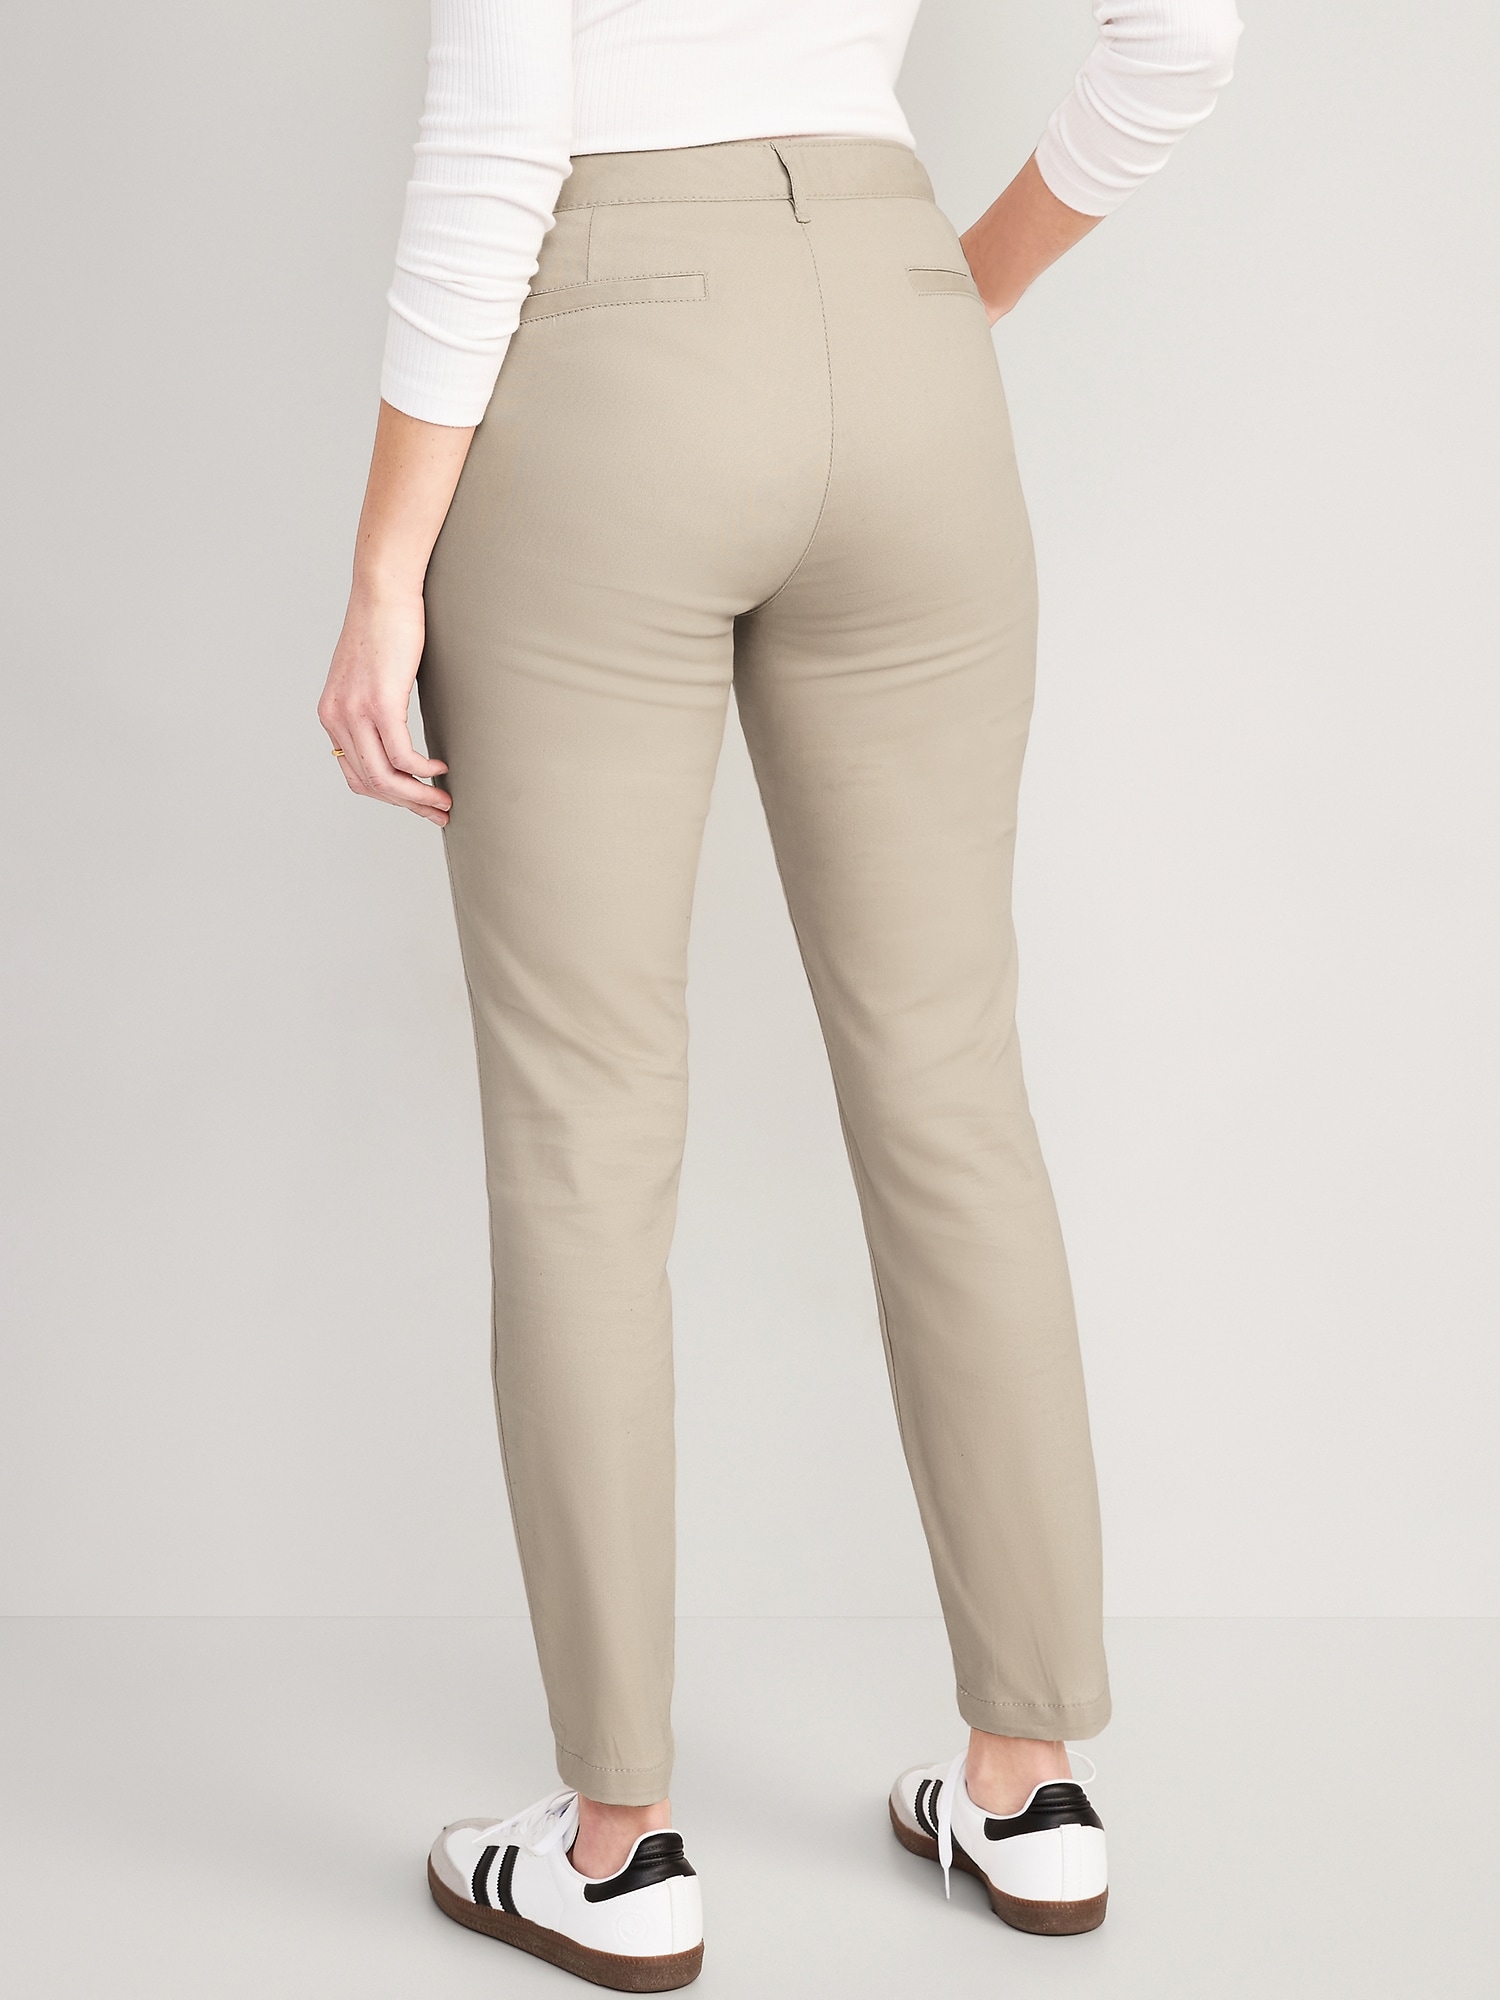 High-waisted Pants for Women